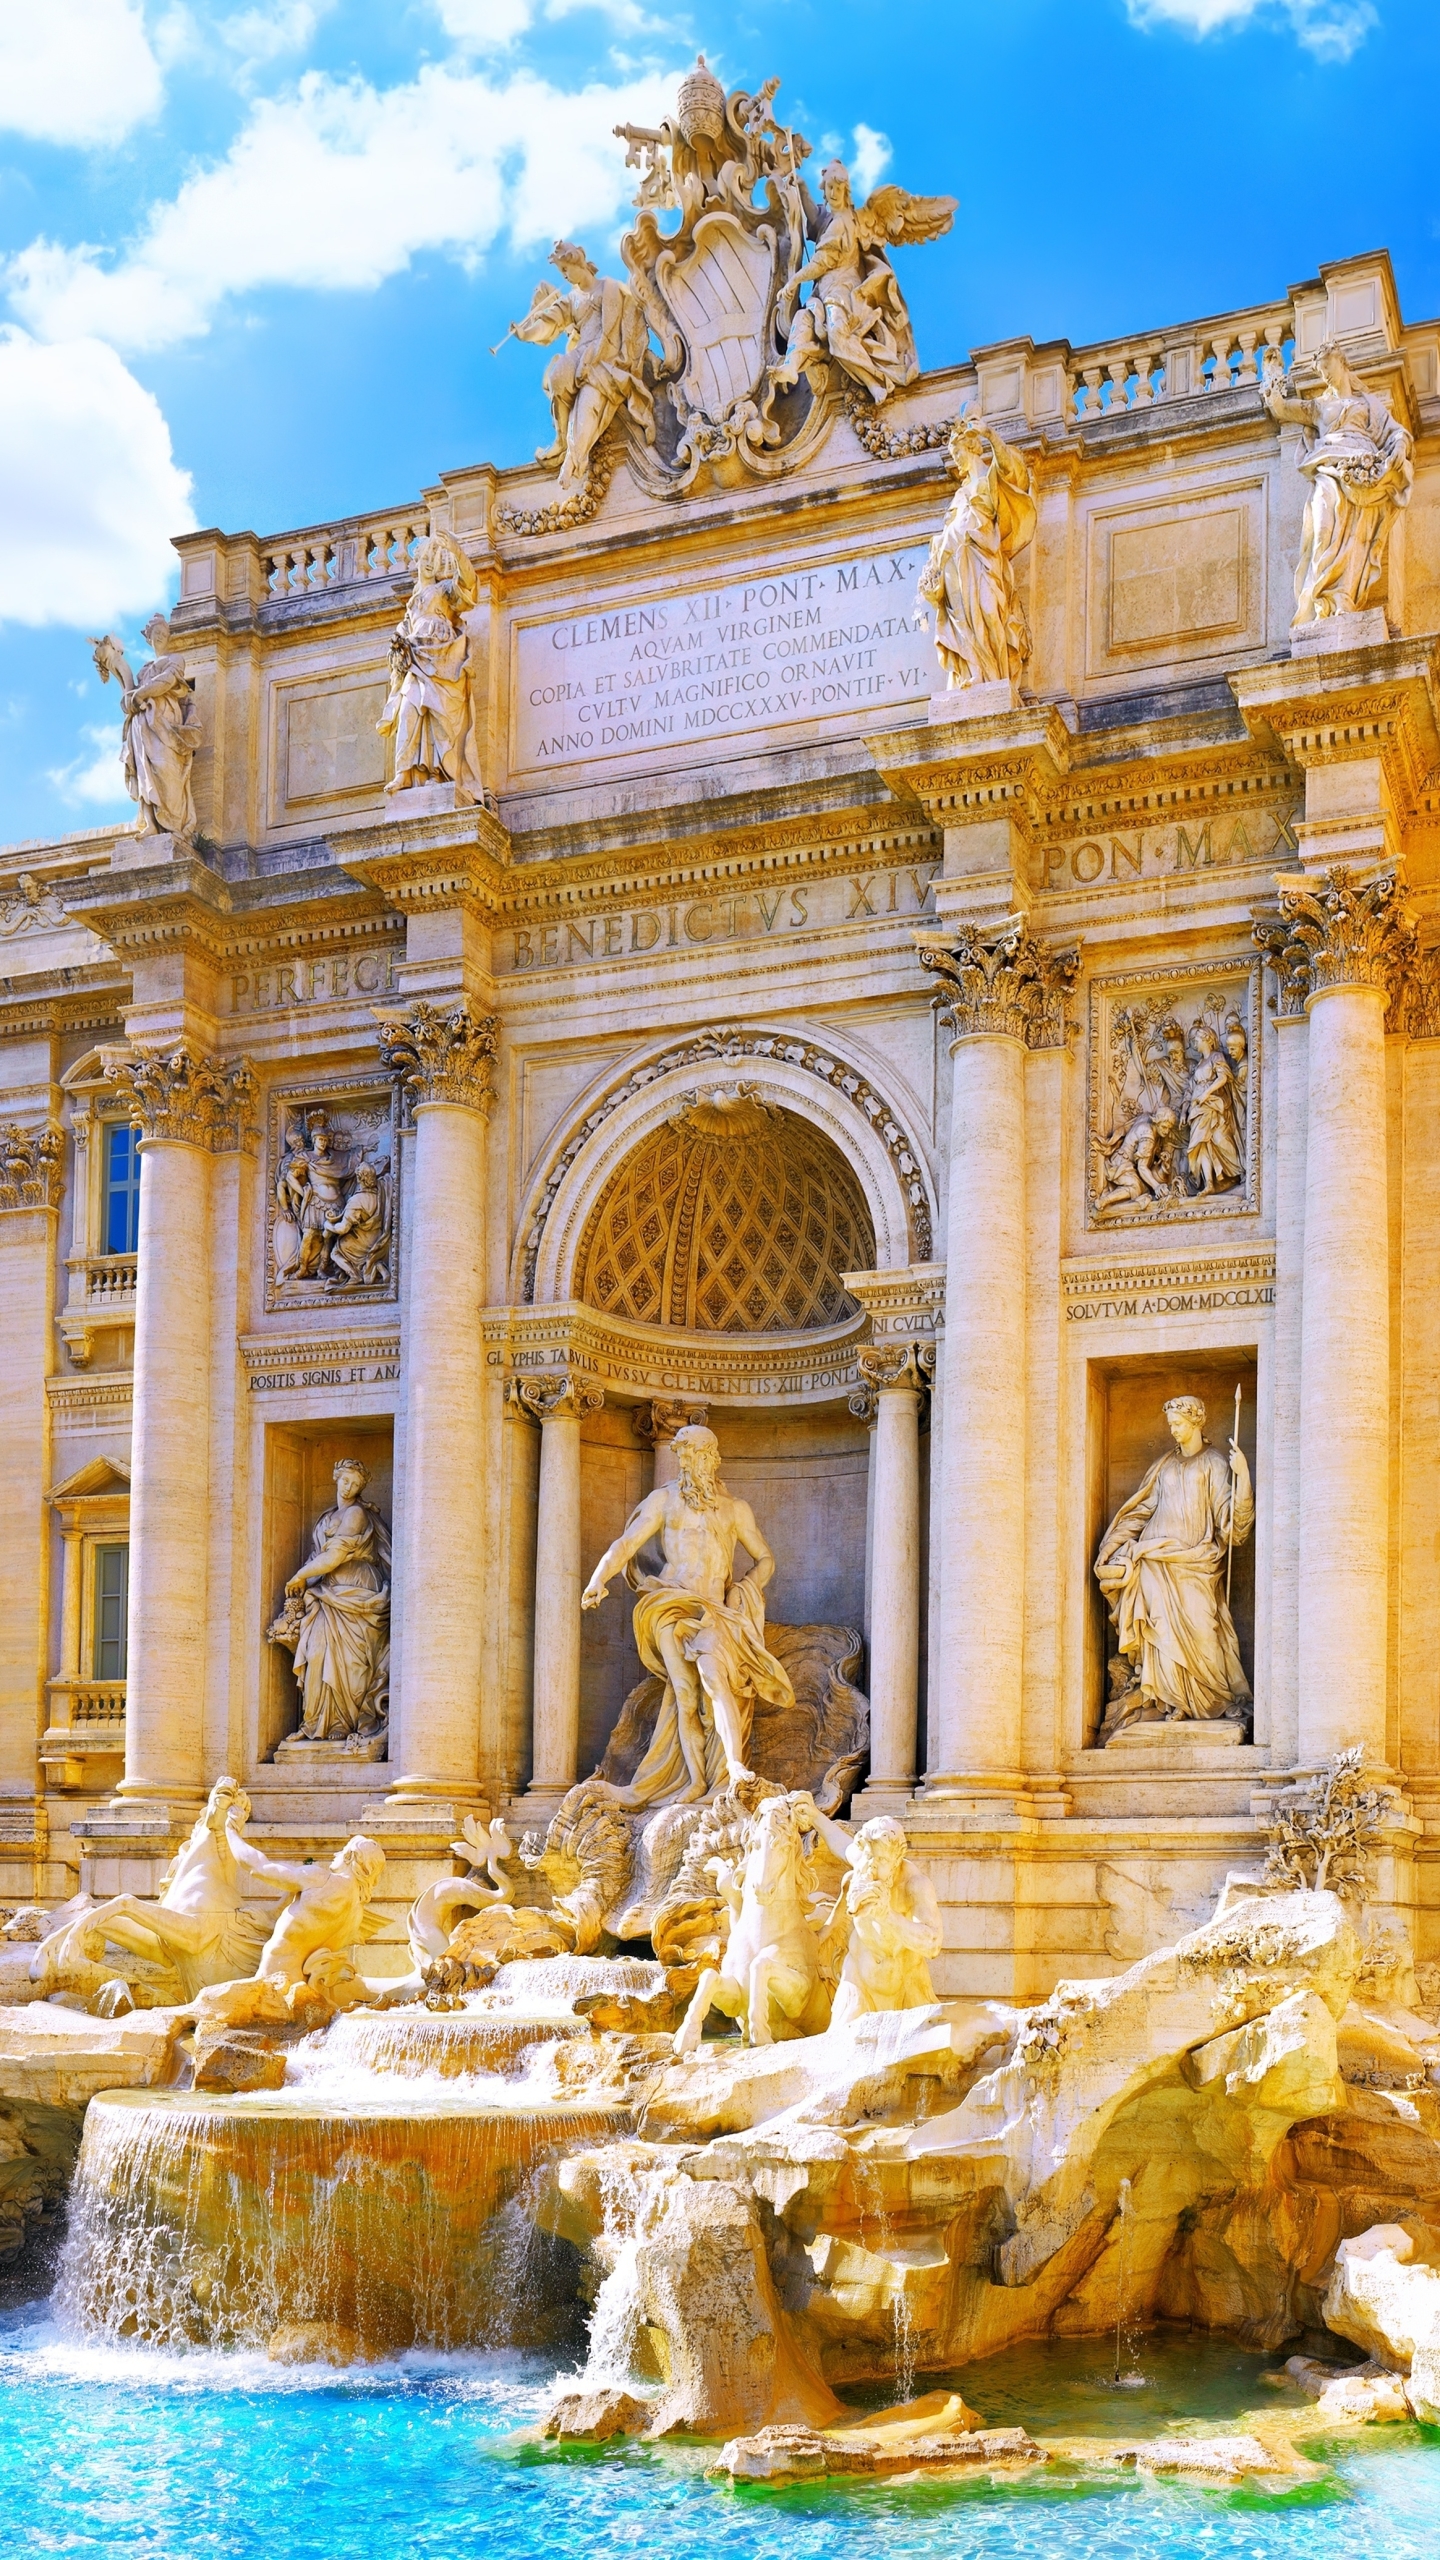 italy, rome, trevi, man made, trevi fountain, statue, fountain, building, monuments